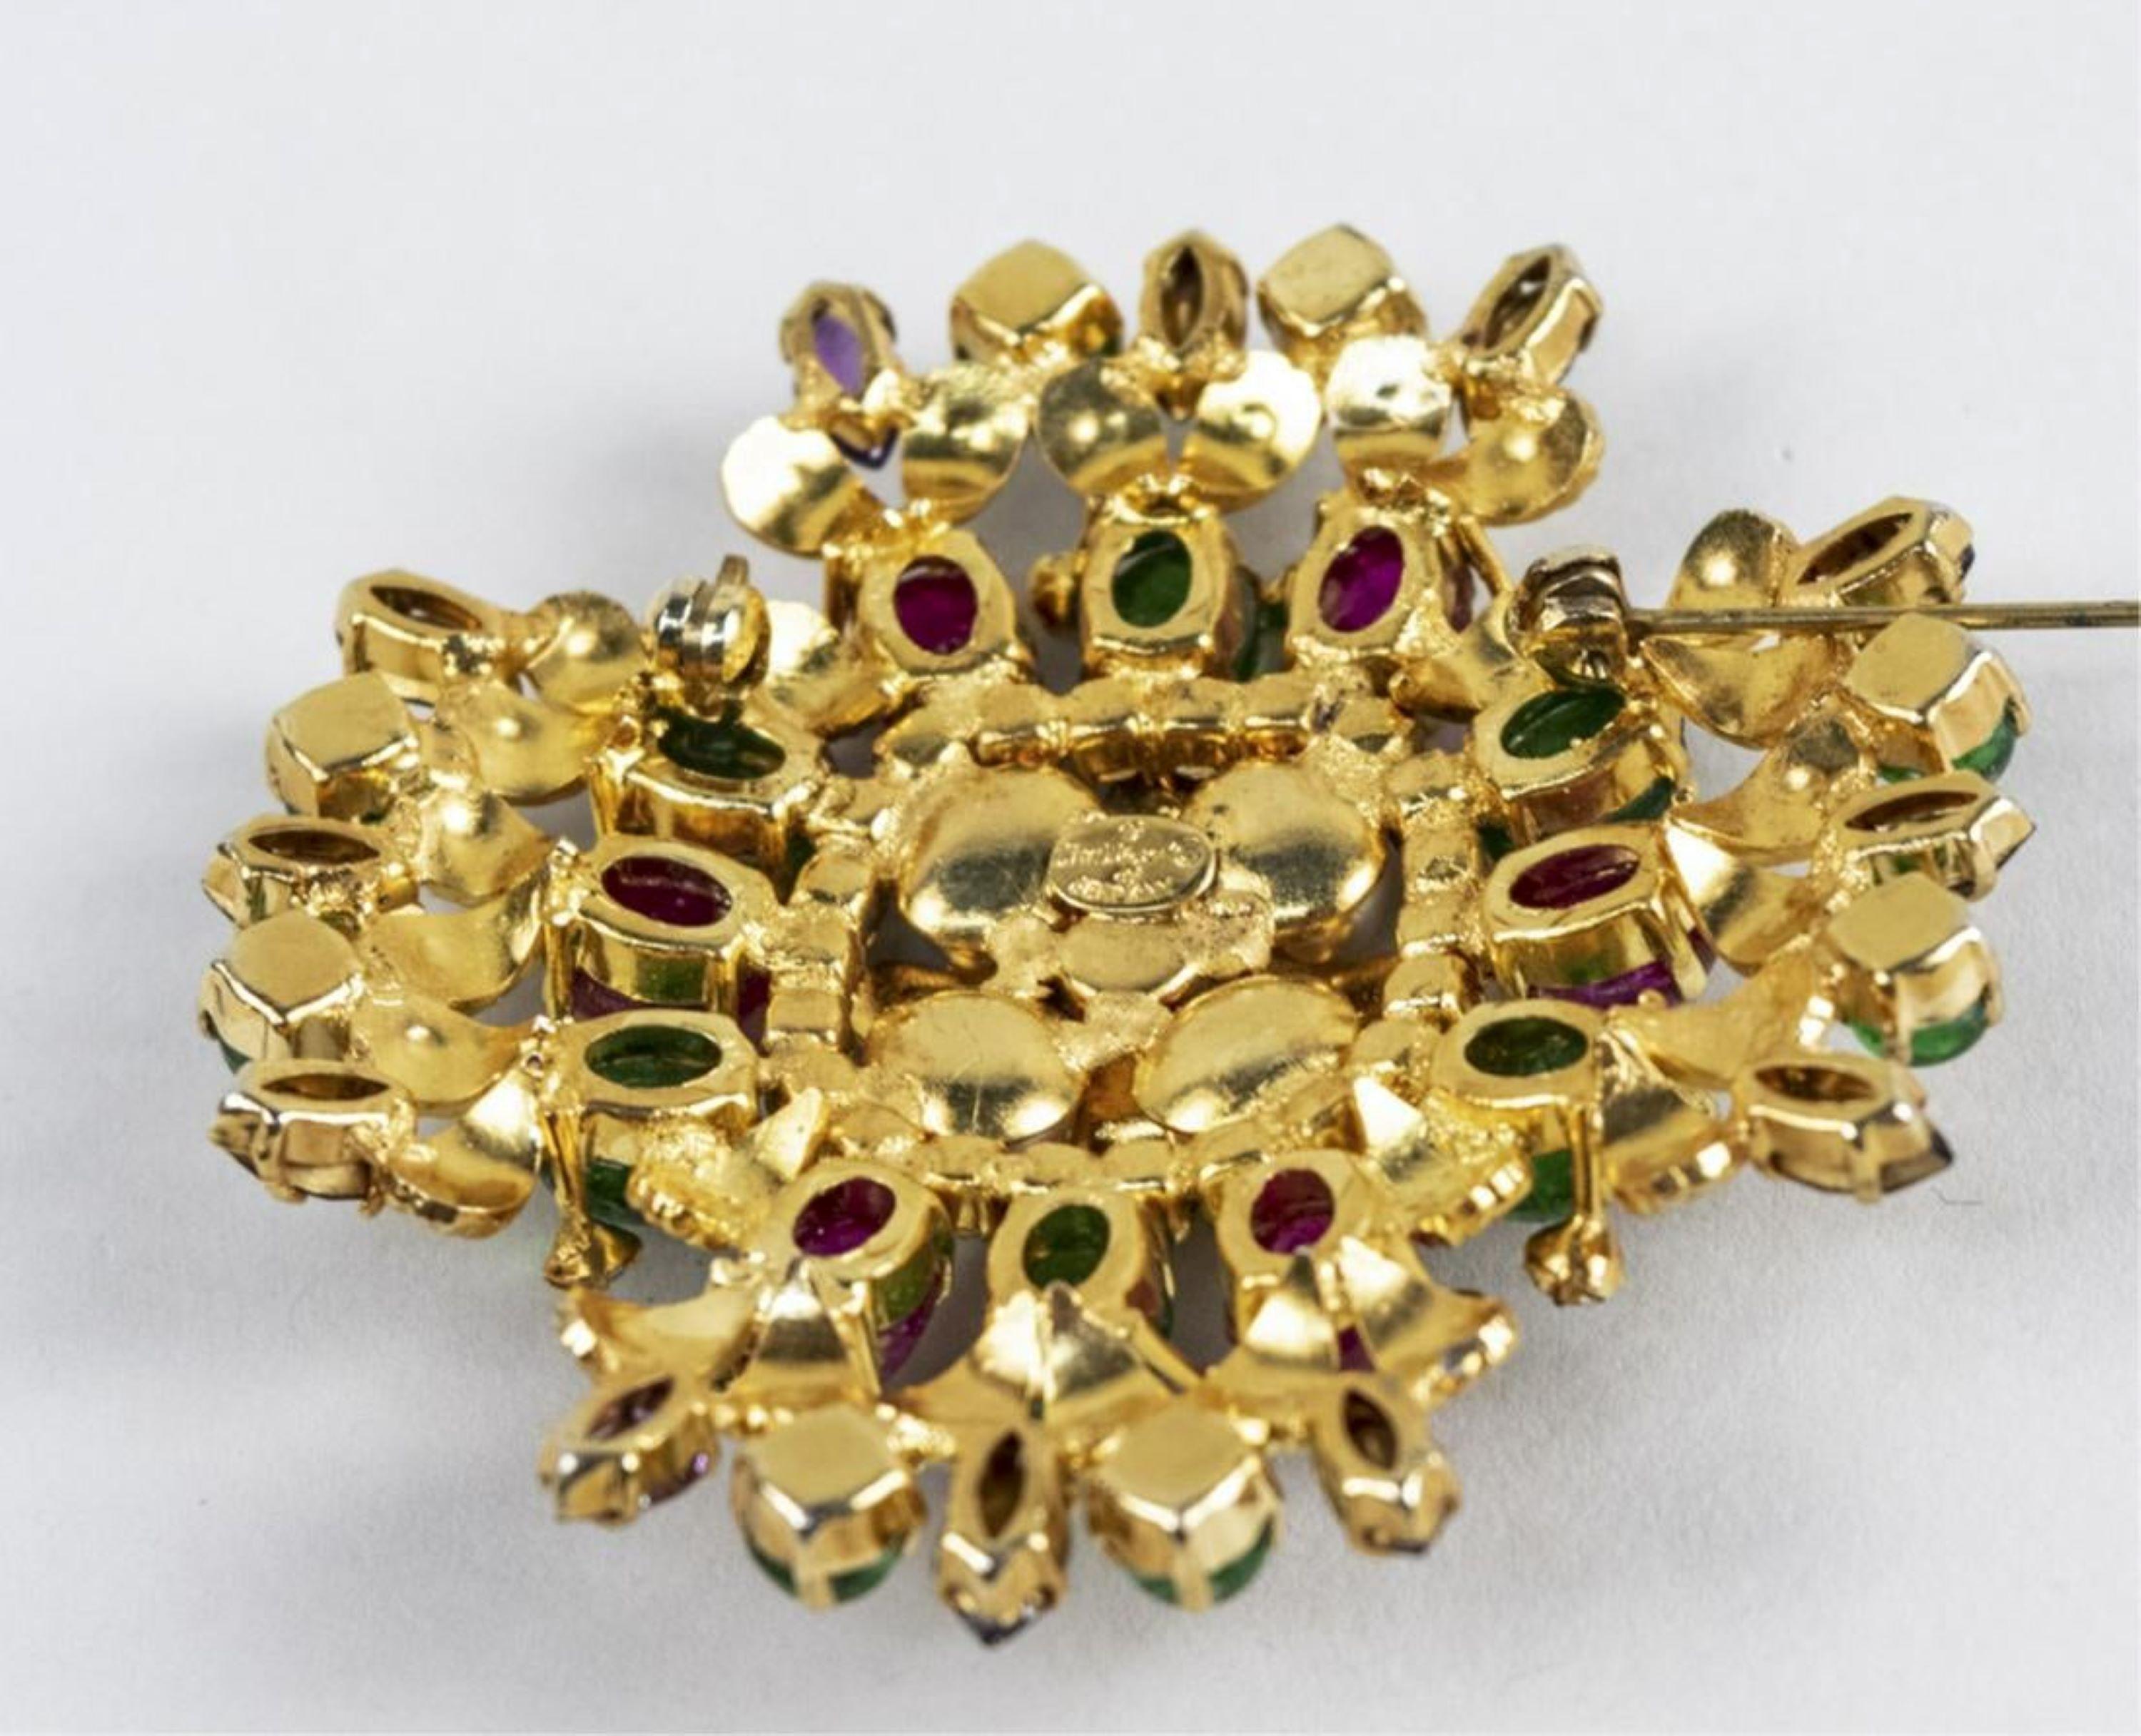 Shaped circular brooch with simulated pearls, emeralds, rubies, and diamonds. Signed. Diameter 2 1/4 in.